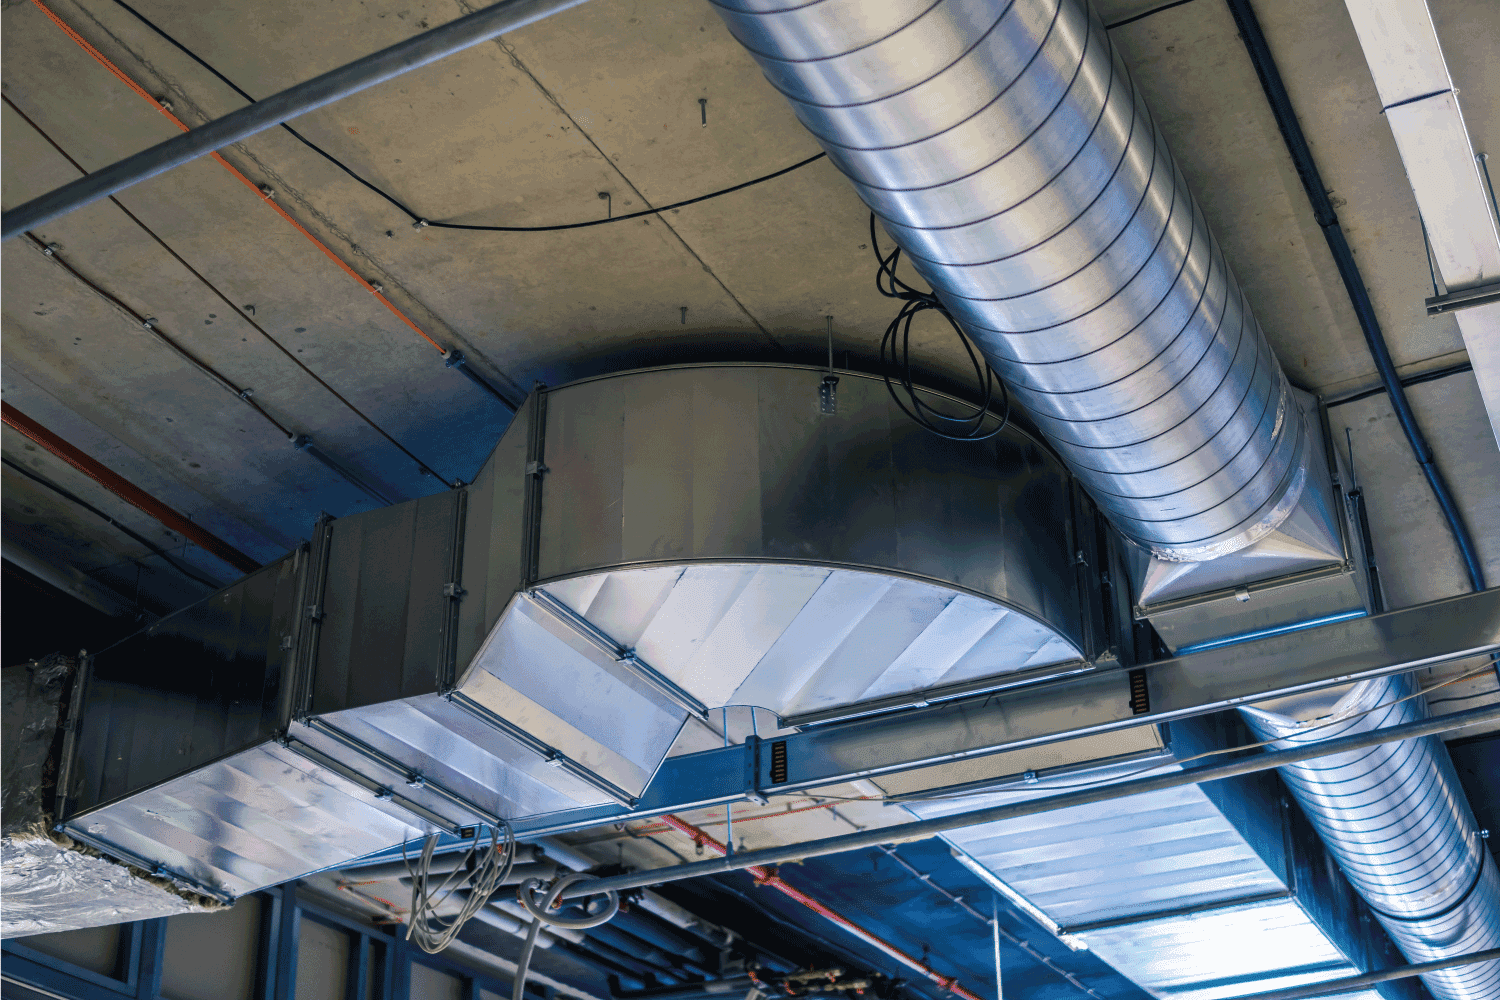 Pipes of HVAC system (heating ventilation and air conditioning)